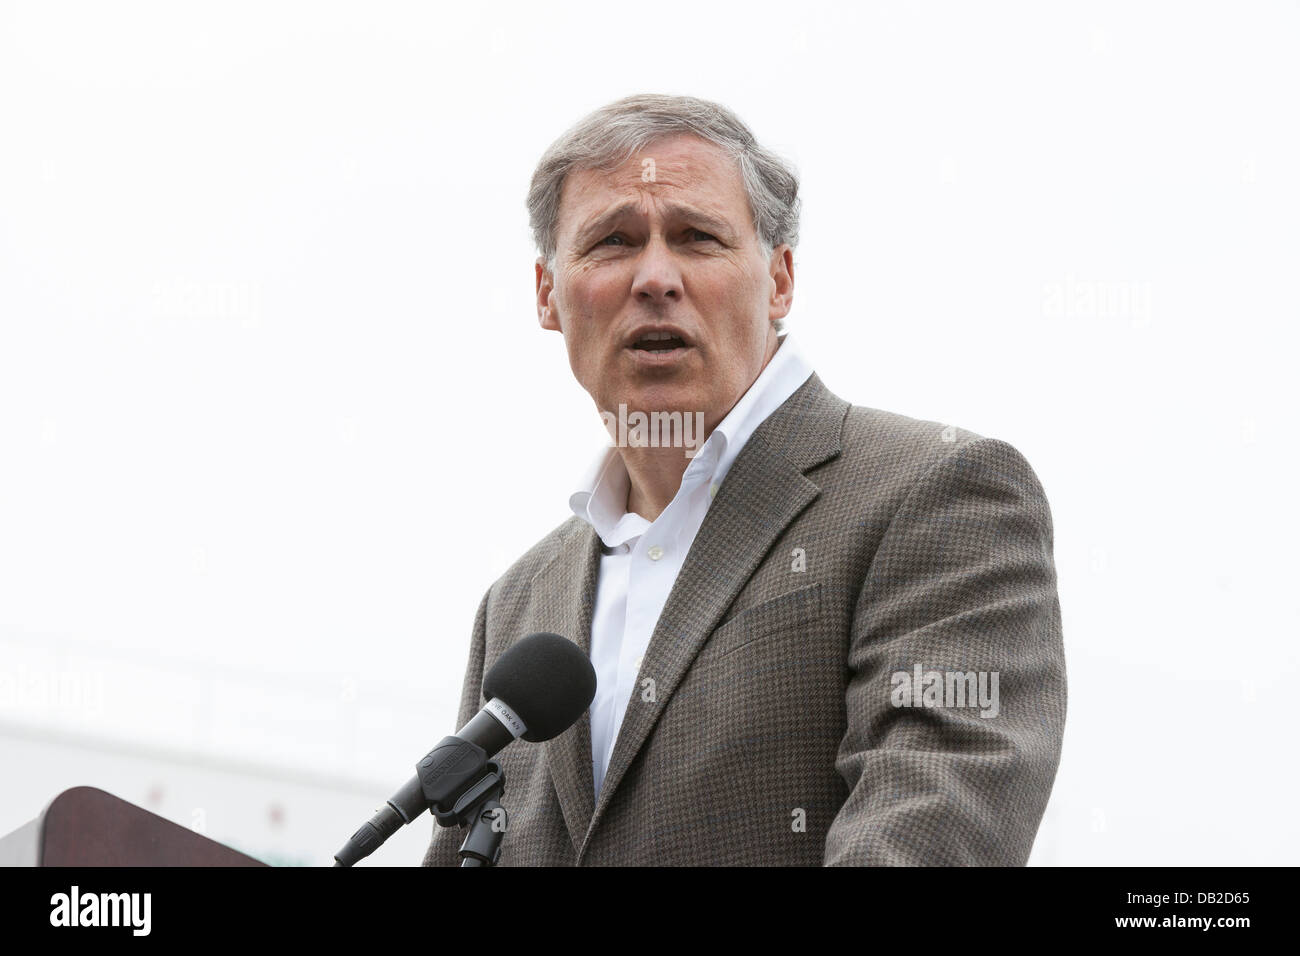 Governor Jay Inslee speaking at the dedication ceremony for the launch of the worlds largest tunneling machine, nicknamed Bertha, on July 20, 2013 in Seattle. The bored road tunnel is replacing the Alaskan Way Viaduct and will carry State Route 99 under Downtown Seattle from the SODO neighborhood to South Lake Union. The two mile long waterfront tunnel is scheduled to open in late 2015. Stock Photo